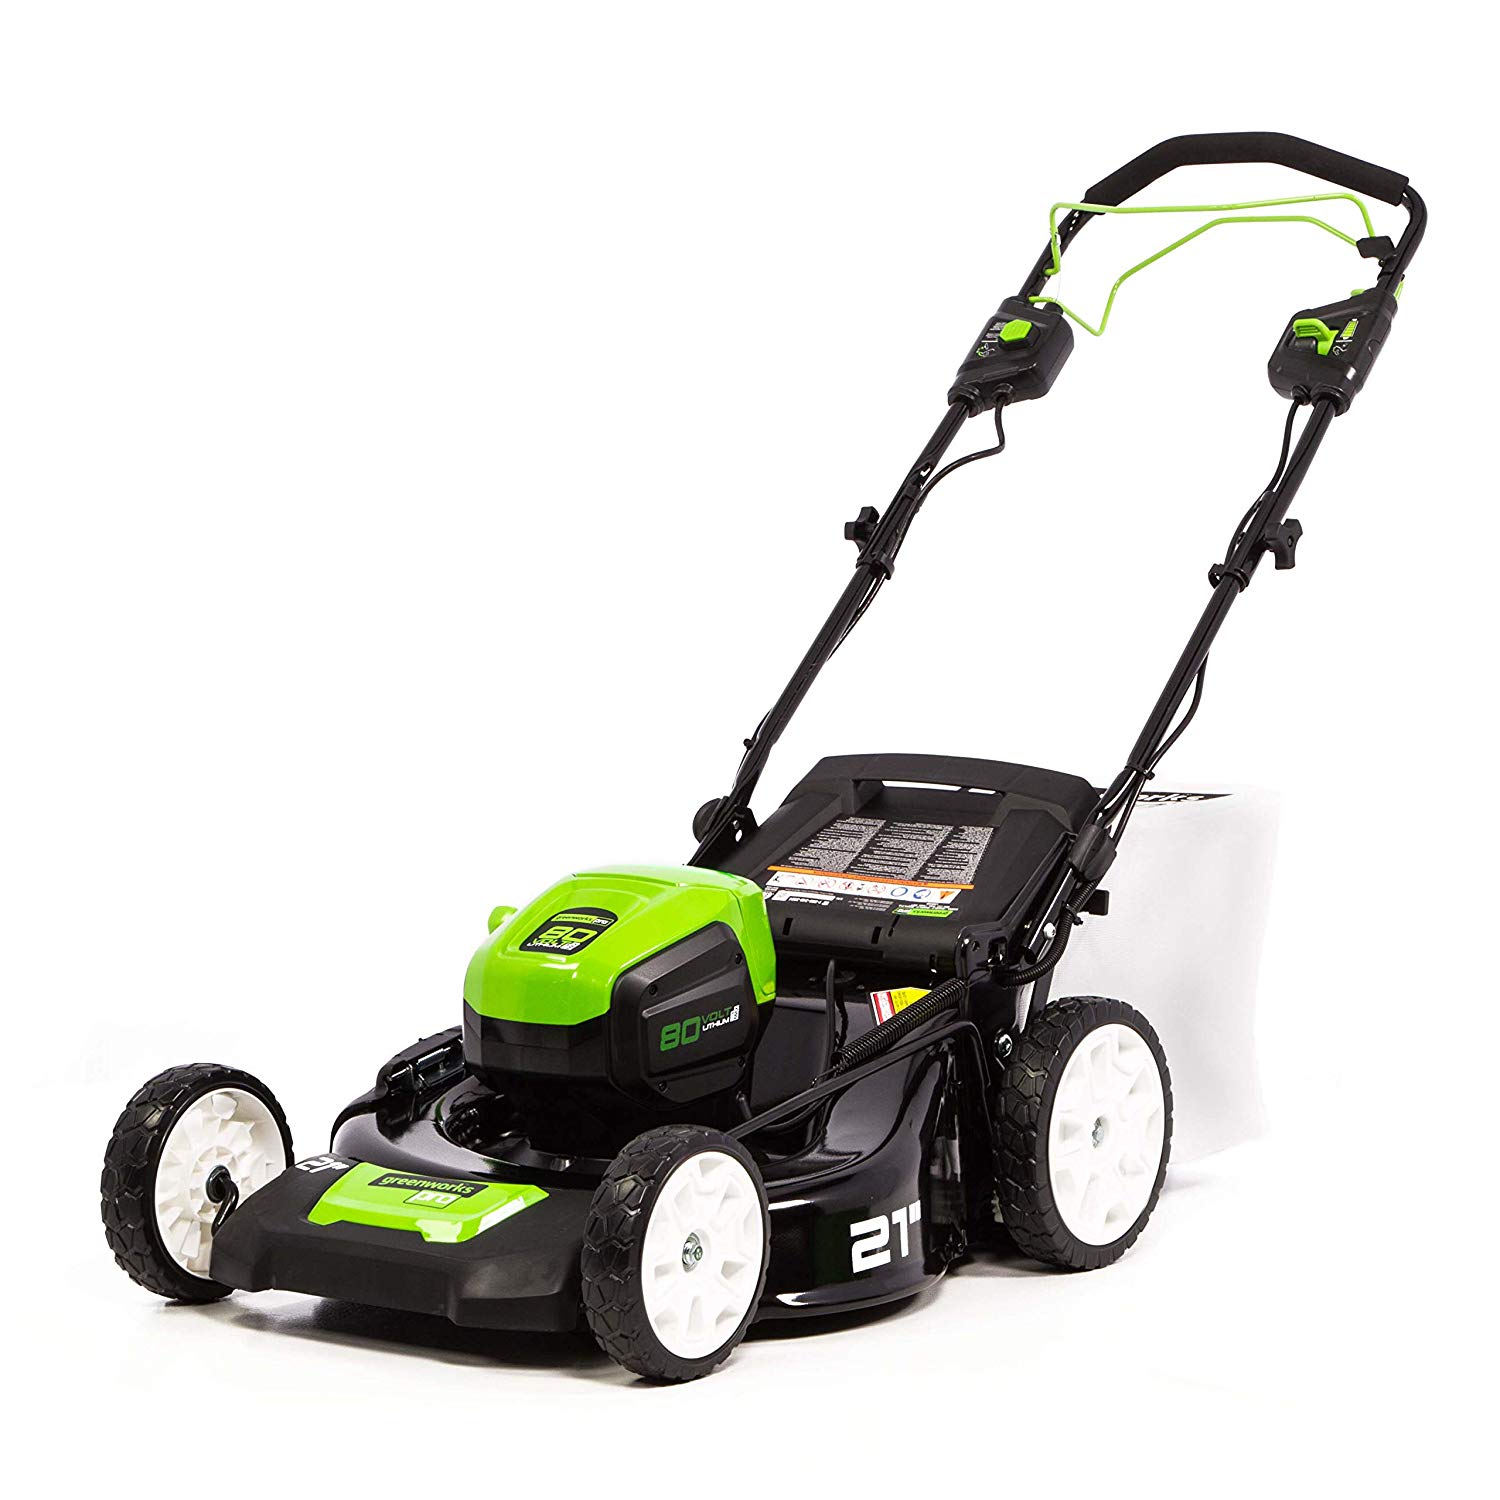 Greenworks PRO 80V 21-Inch Self-Propelled Cordless Lawn Mower